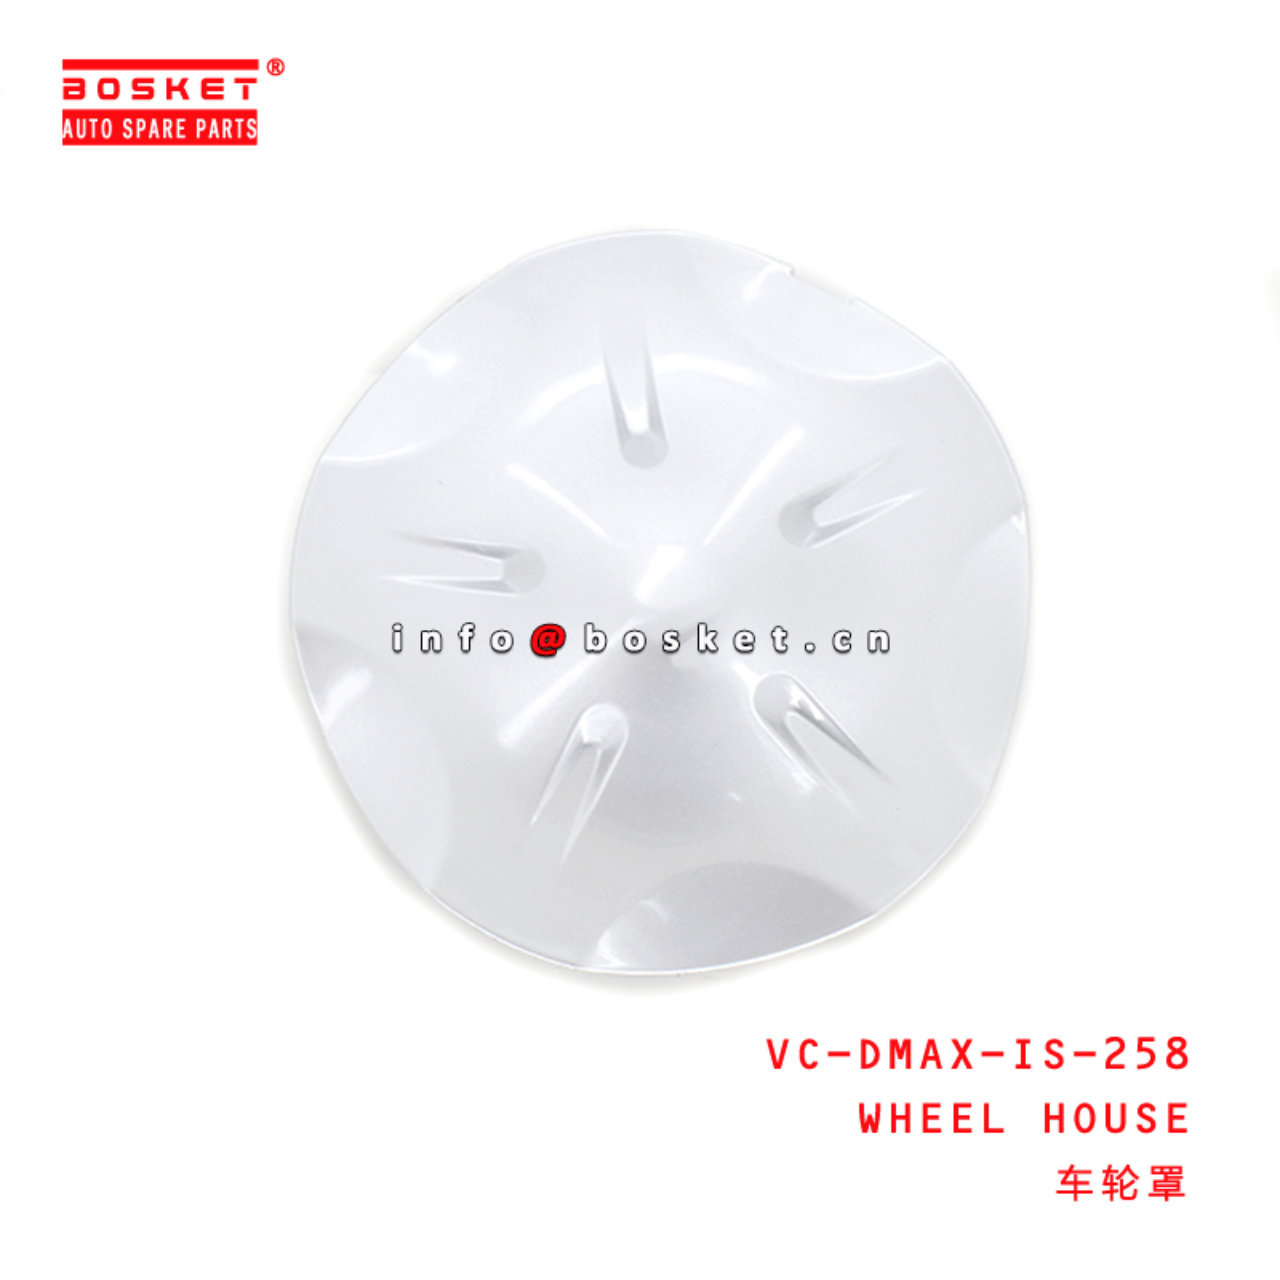  VC-DMAX-IS-258 Wheel House Suitable for ISUZU D-MAX 2013-2015